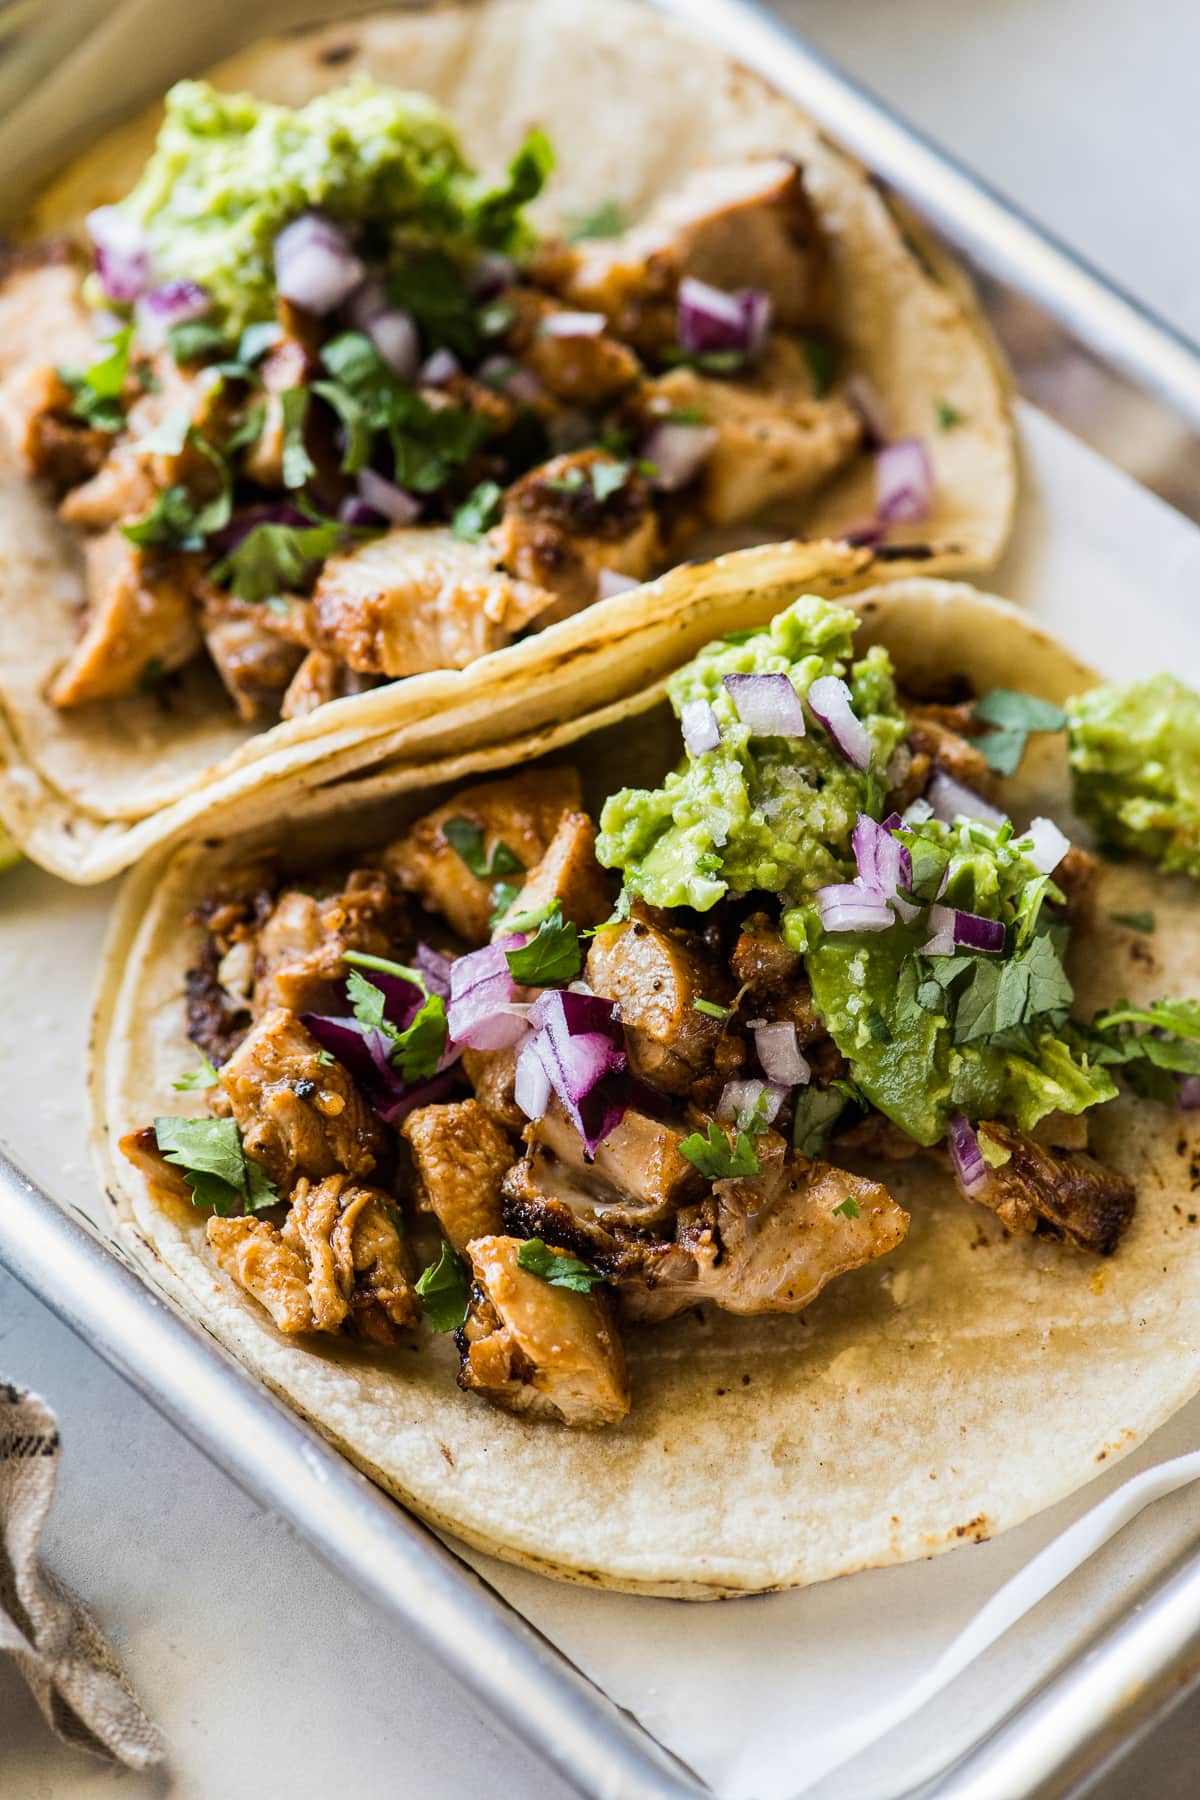 The best chicken tacos recipe on warm corn tortillas topped with avocado, red onion, cilantro and lime juice.